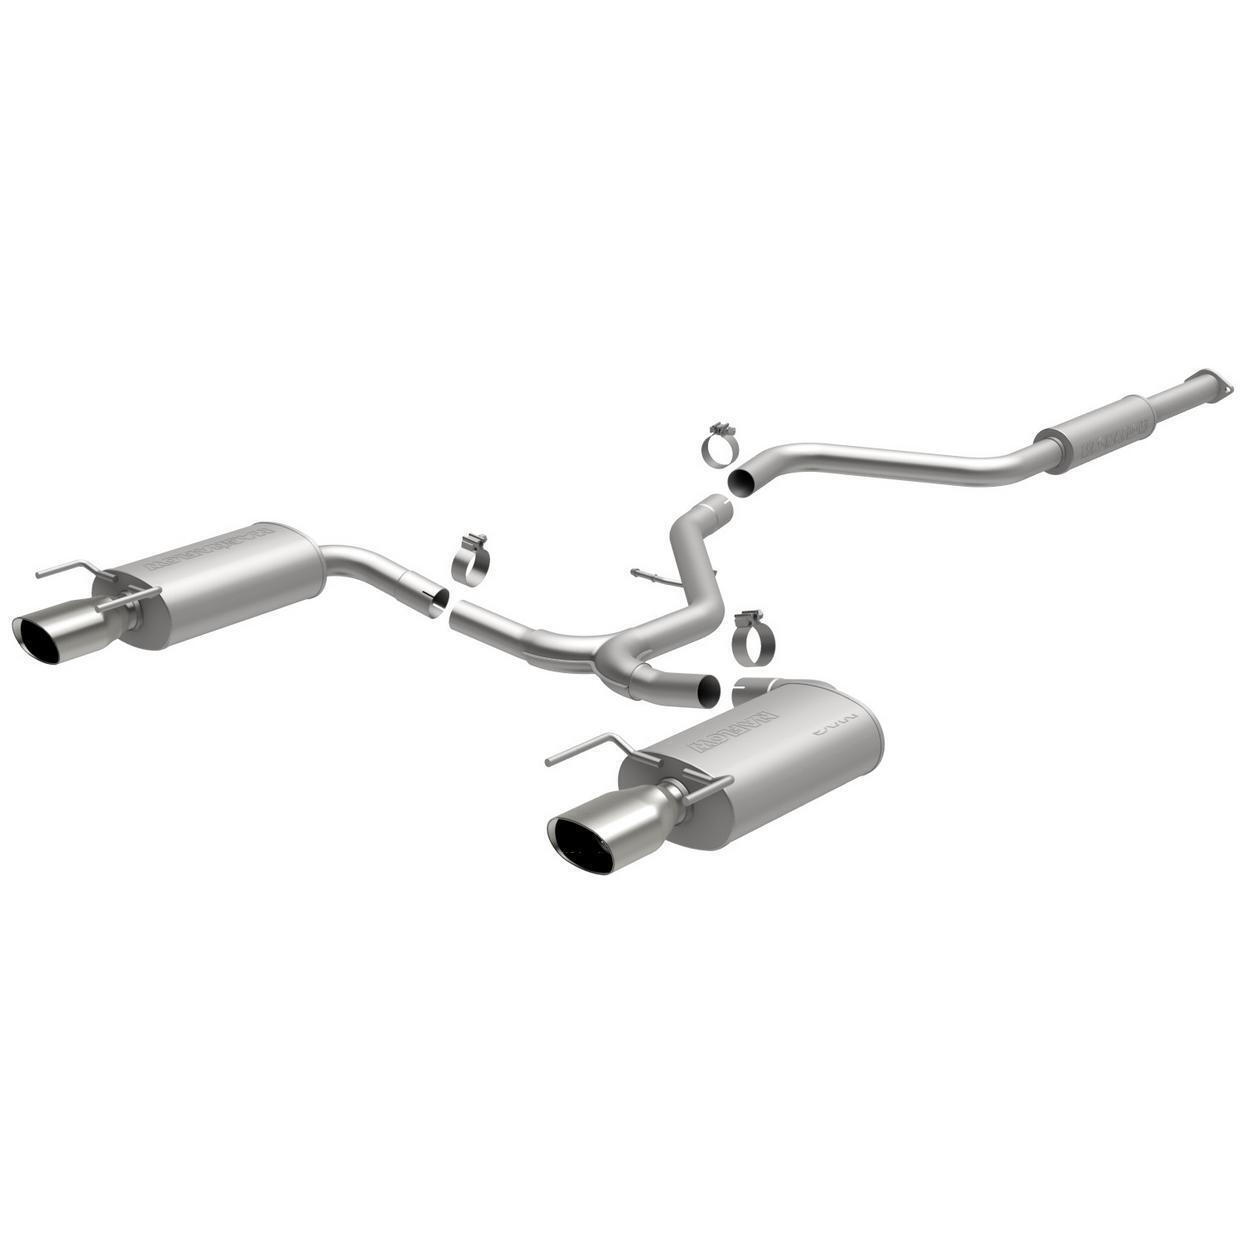 MagnaFlow 15498-AX Exhaust System Kit for 2012-2013 Buick Regal